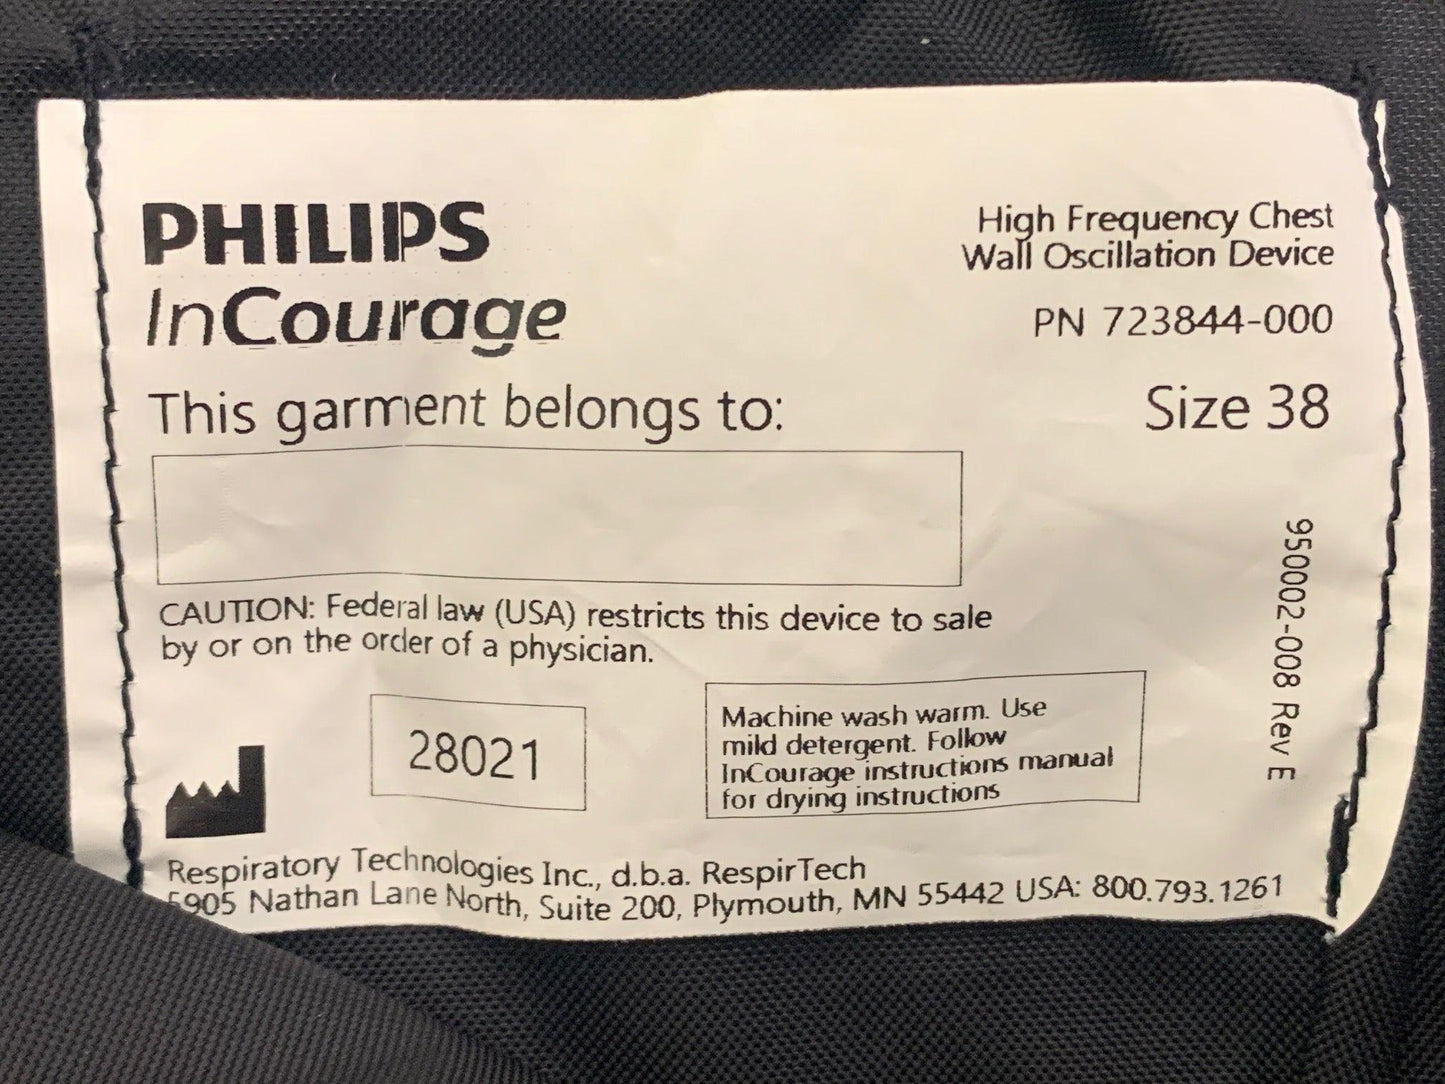 REFURBISHED REFURBISHED Philips Respirtech InCourage Airway Clearance System 270 Hours Size 38 - MBR Medicals